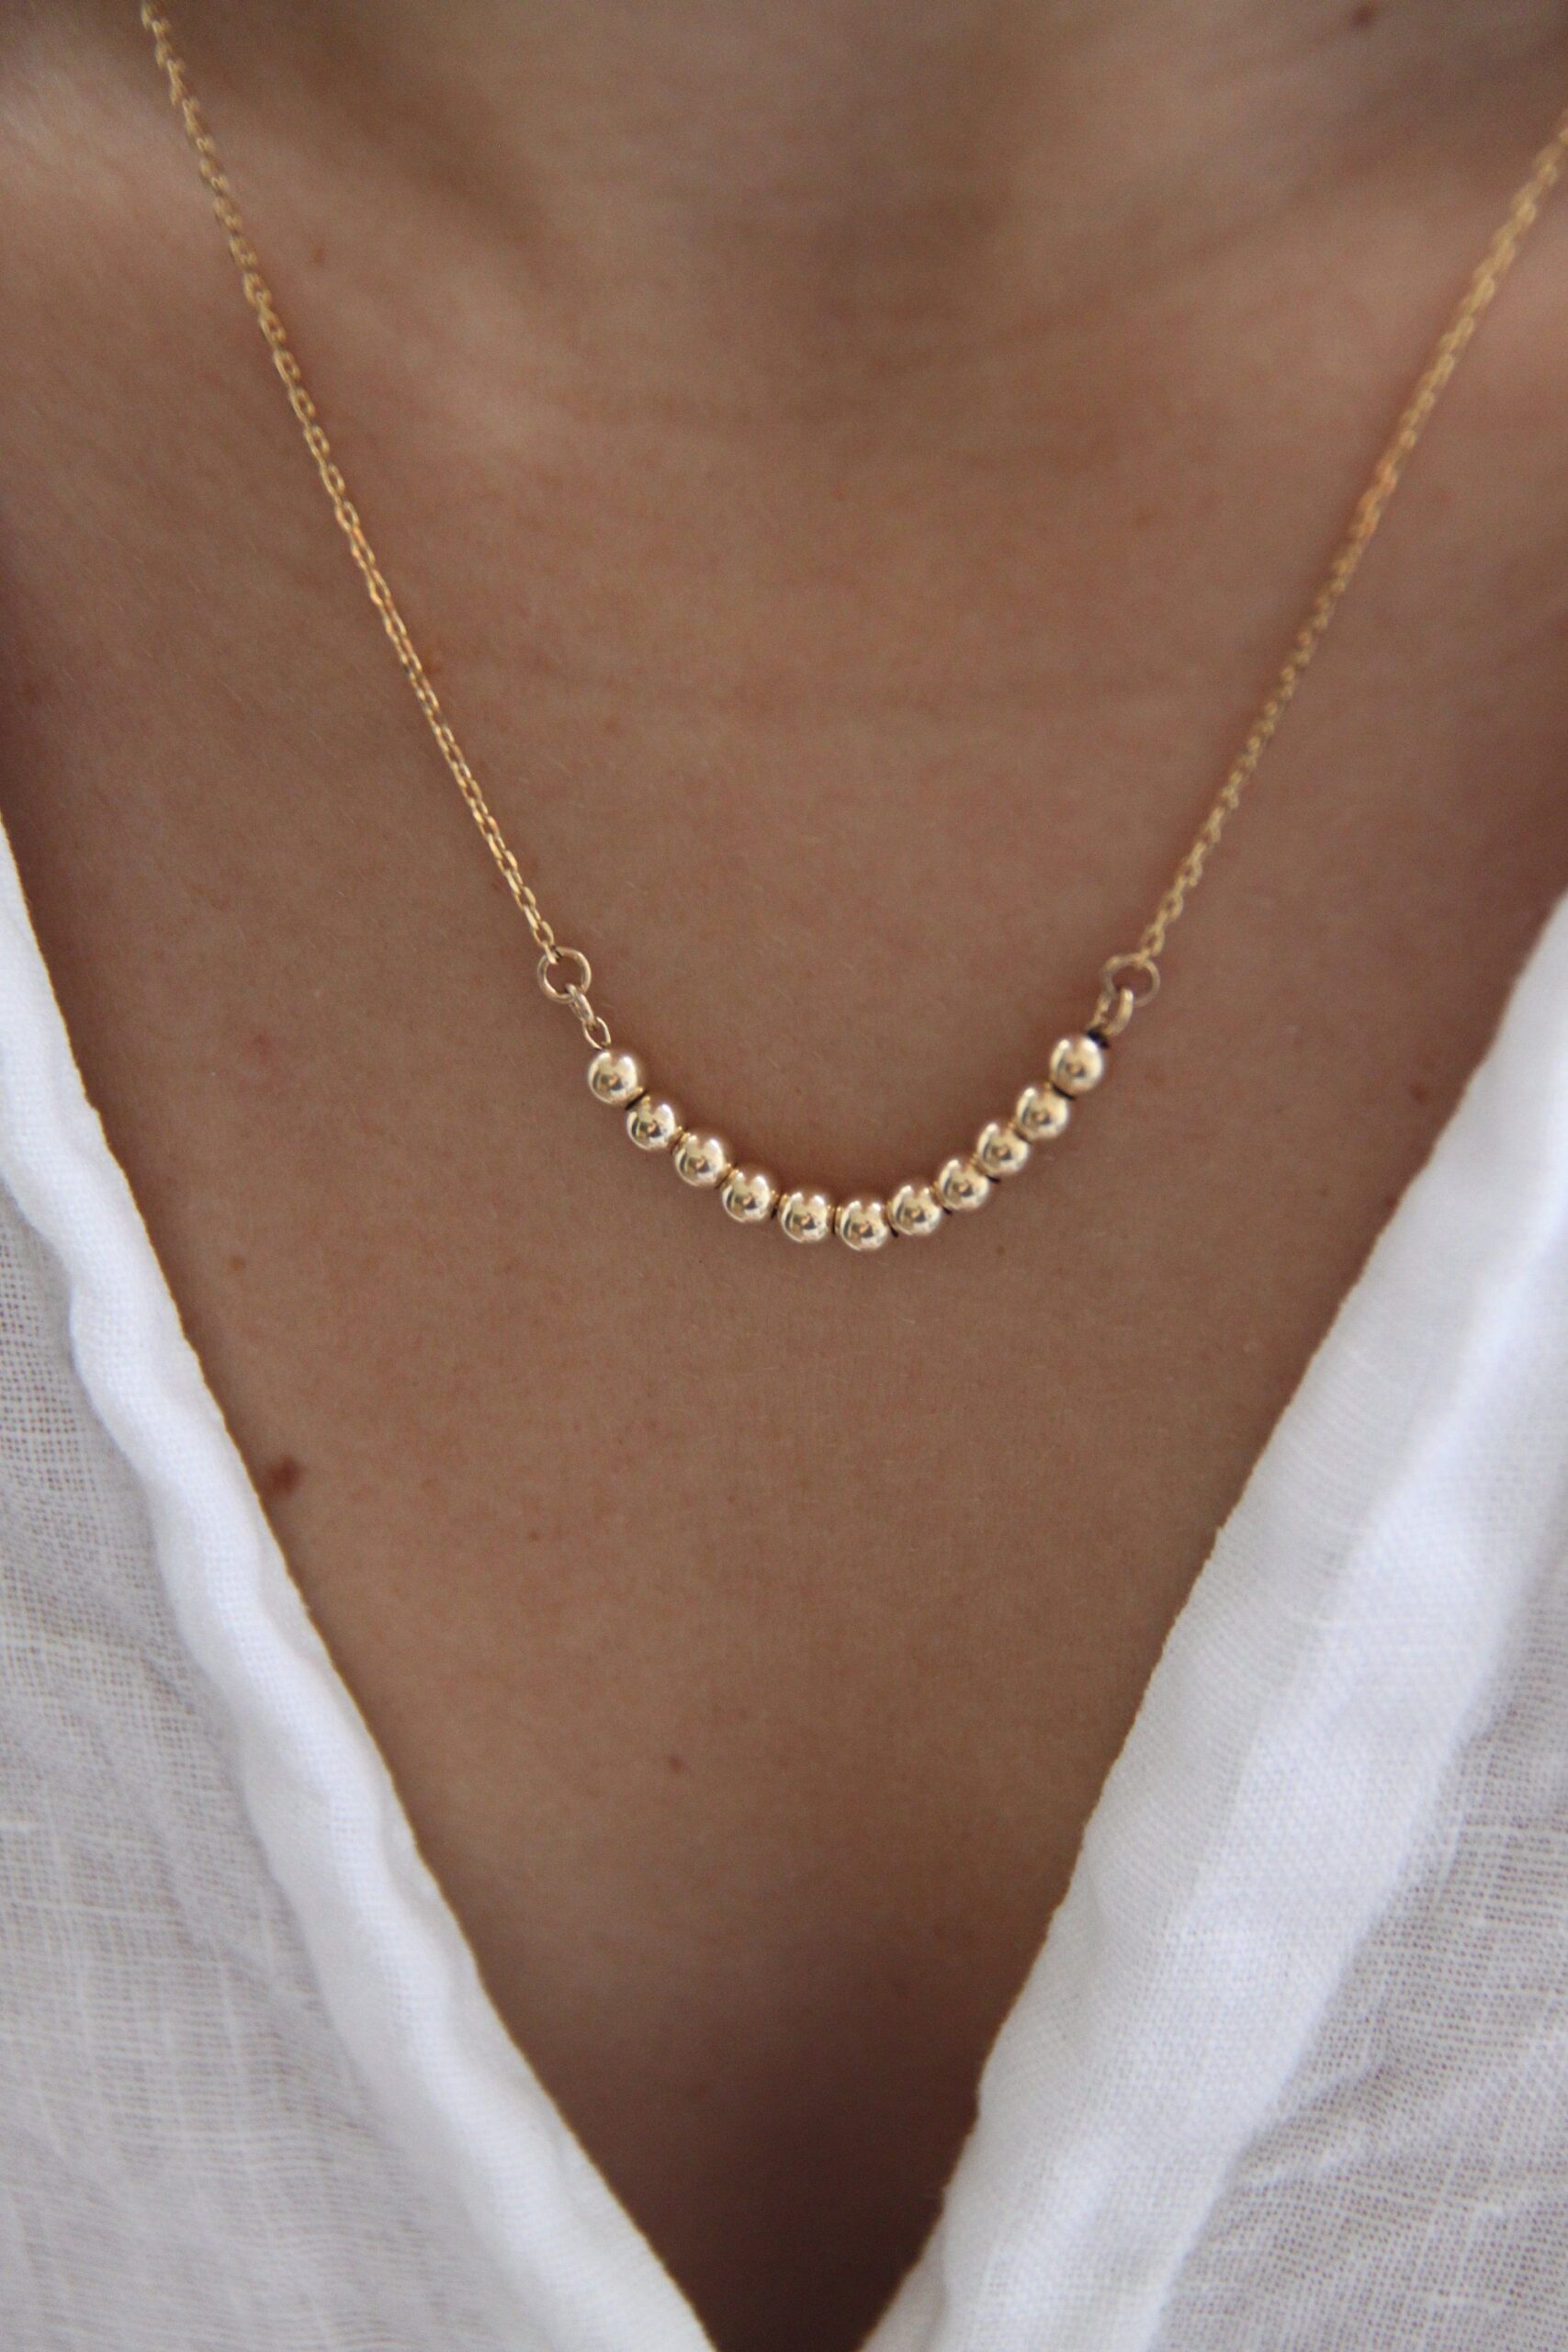 Add a Touch of Glamour with Gold Chain Designs